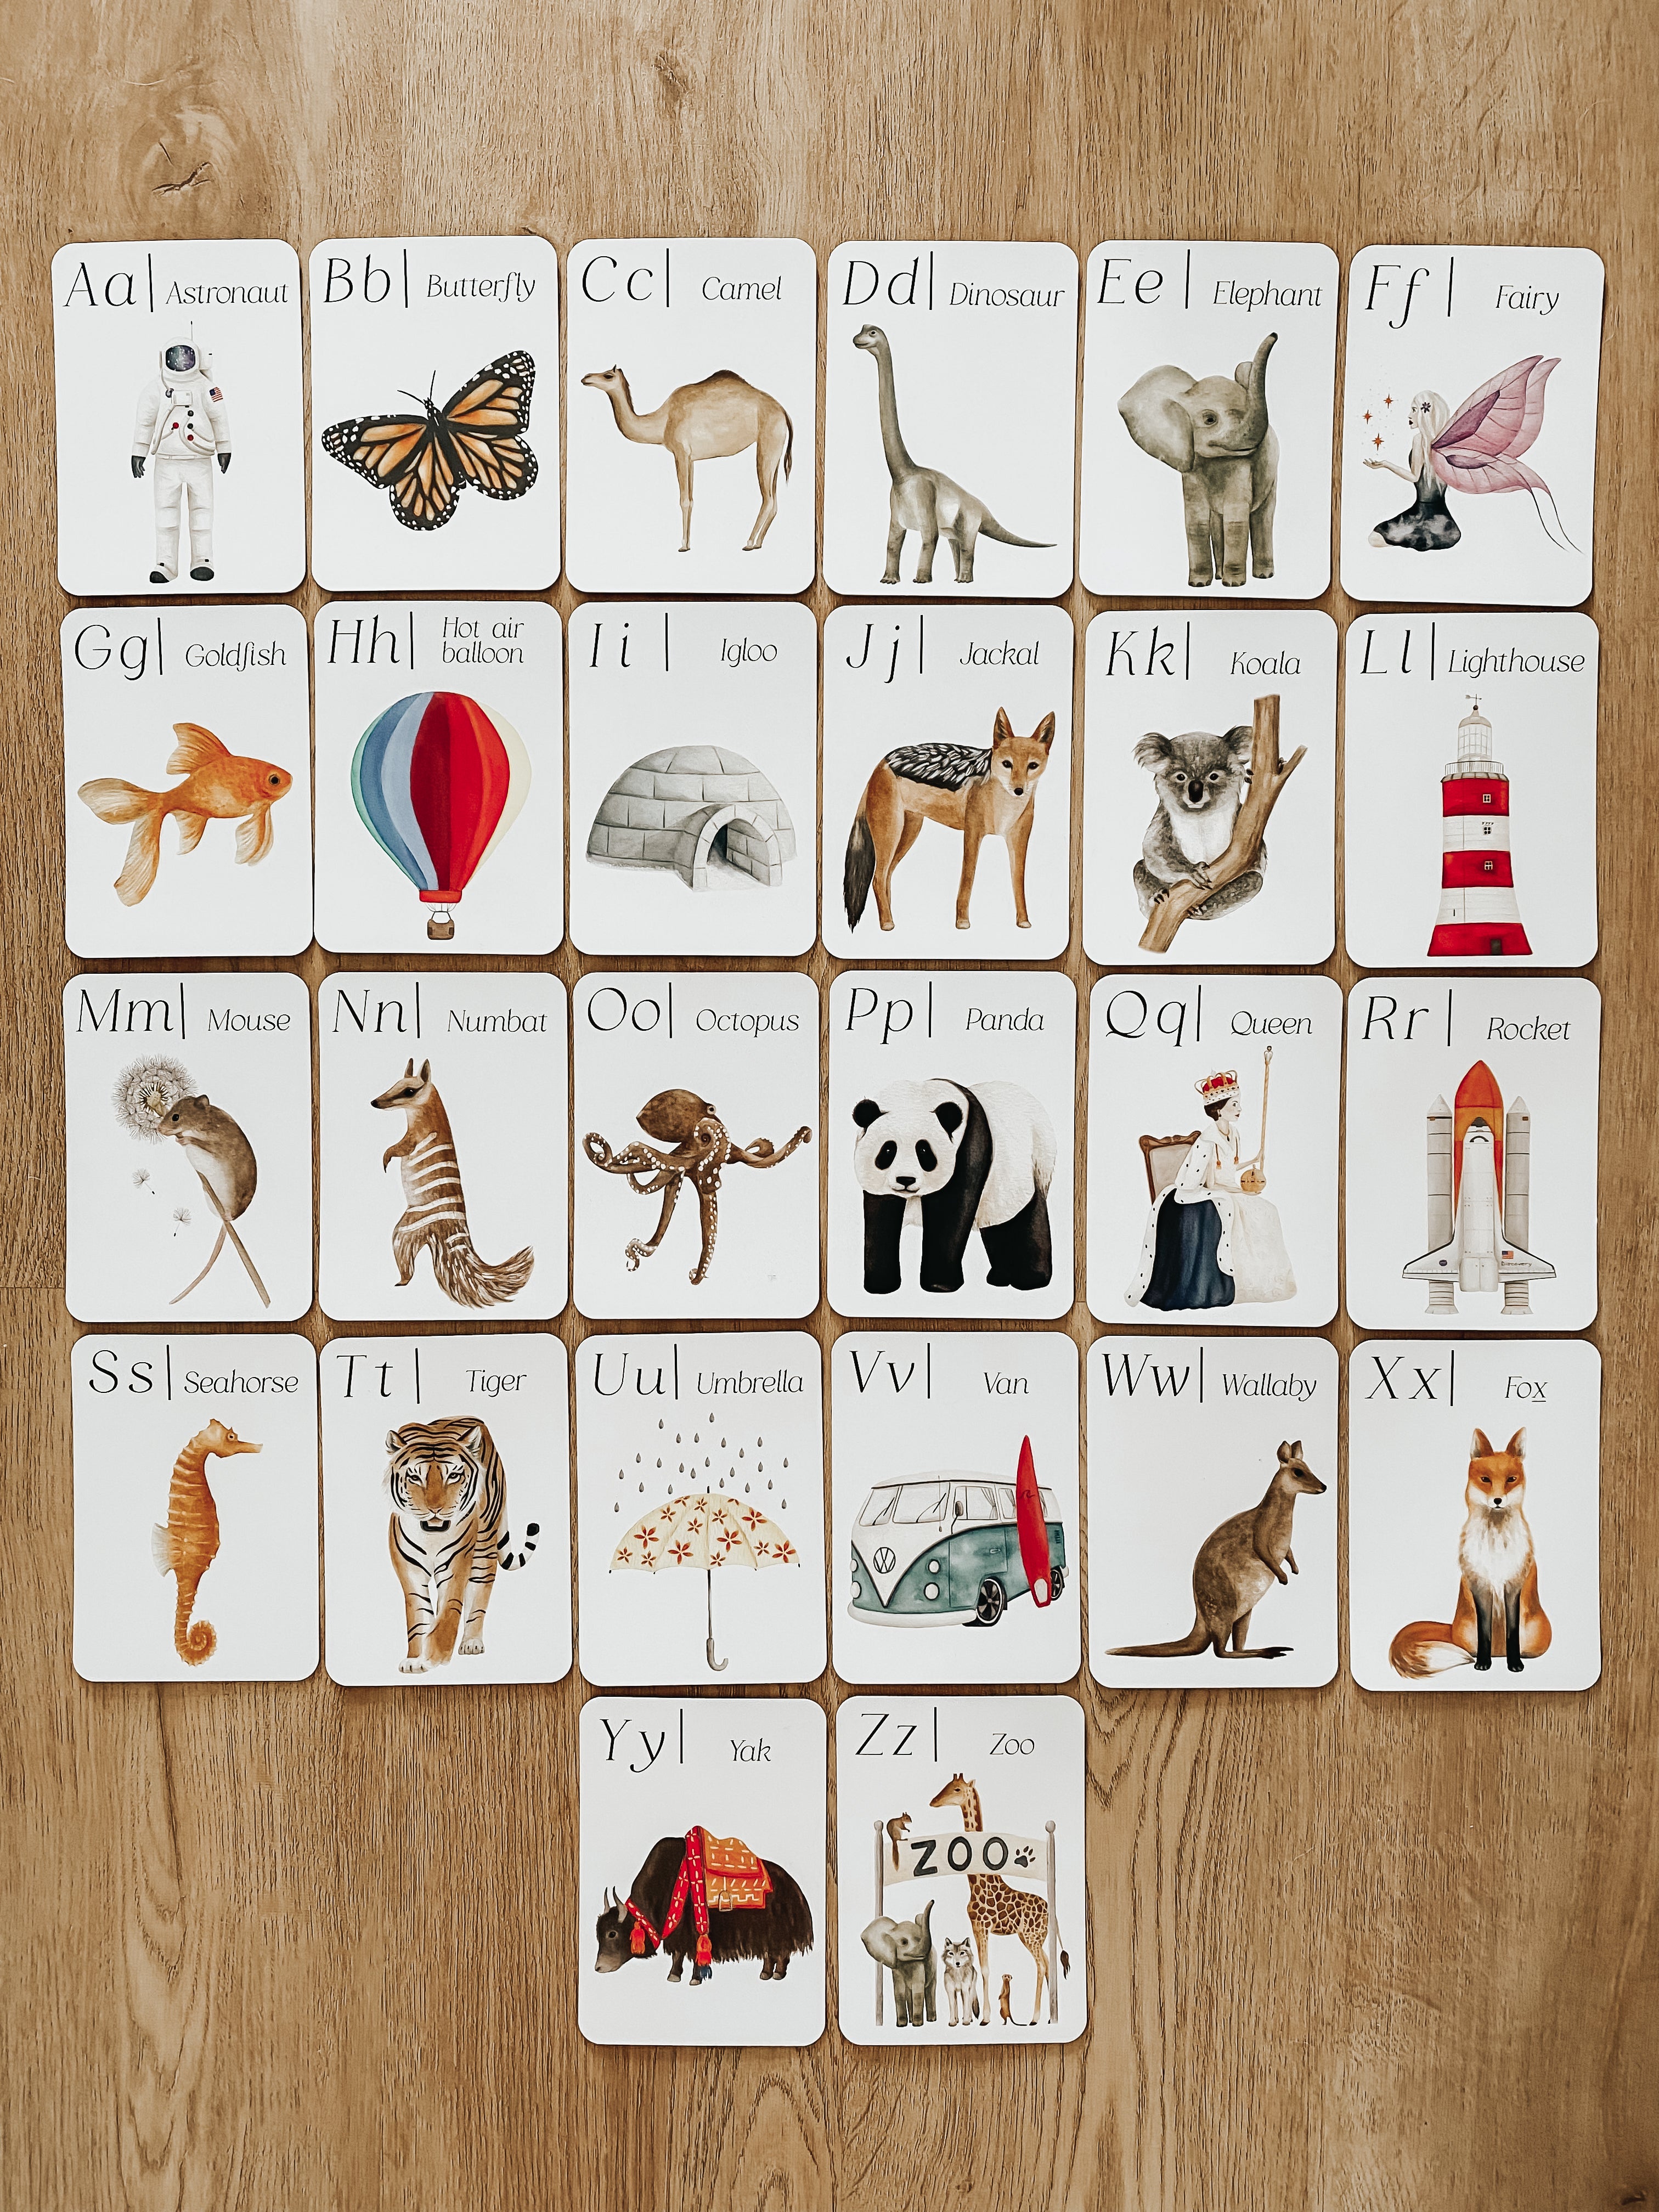 Around the world phonics and sounds Flashcards